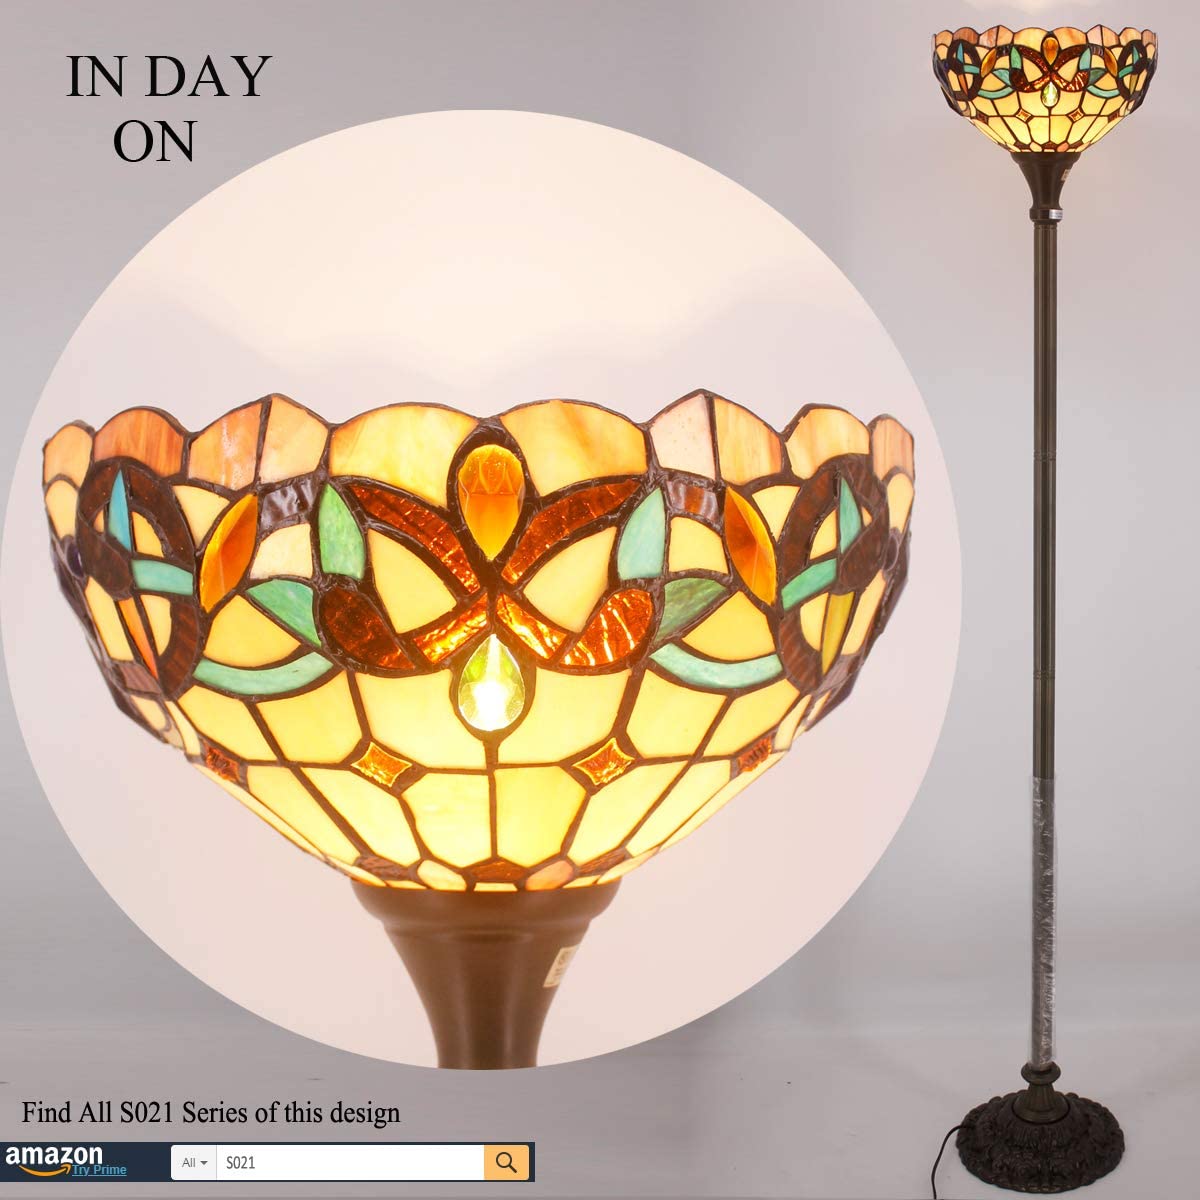 BBNBDMZ  Floor Lamp Serenity Victorian Stained Glass Light 12X12X66 Inches Pole Torchiere Standing Corner Torch Uplight Decor Bedroom Living Room  Office S021 Series